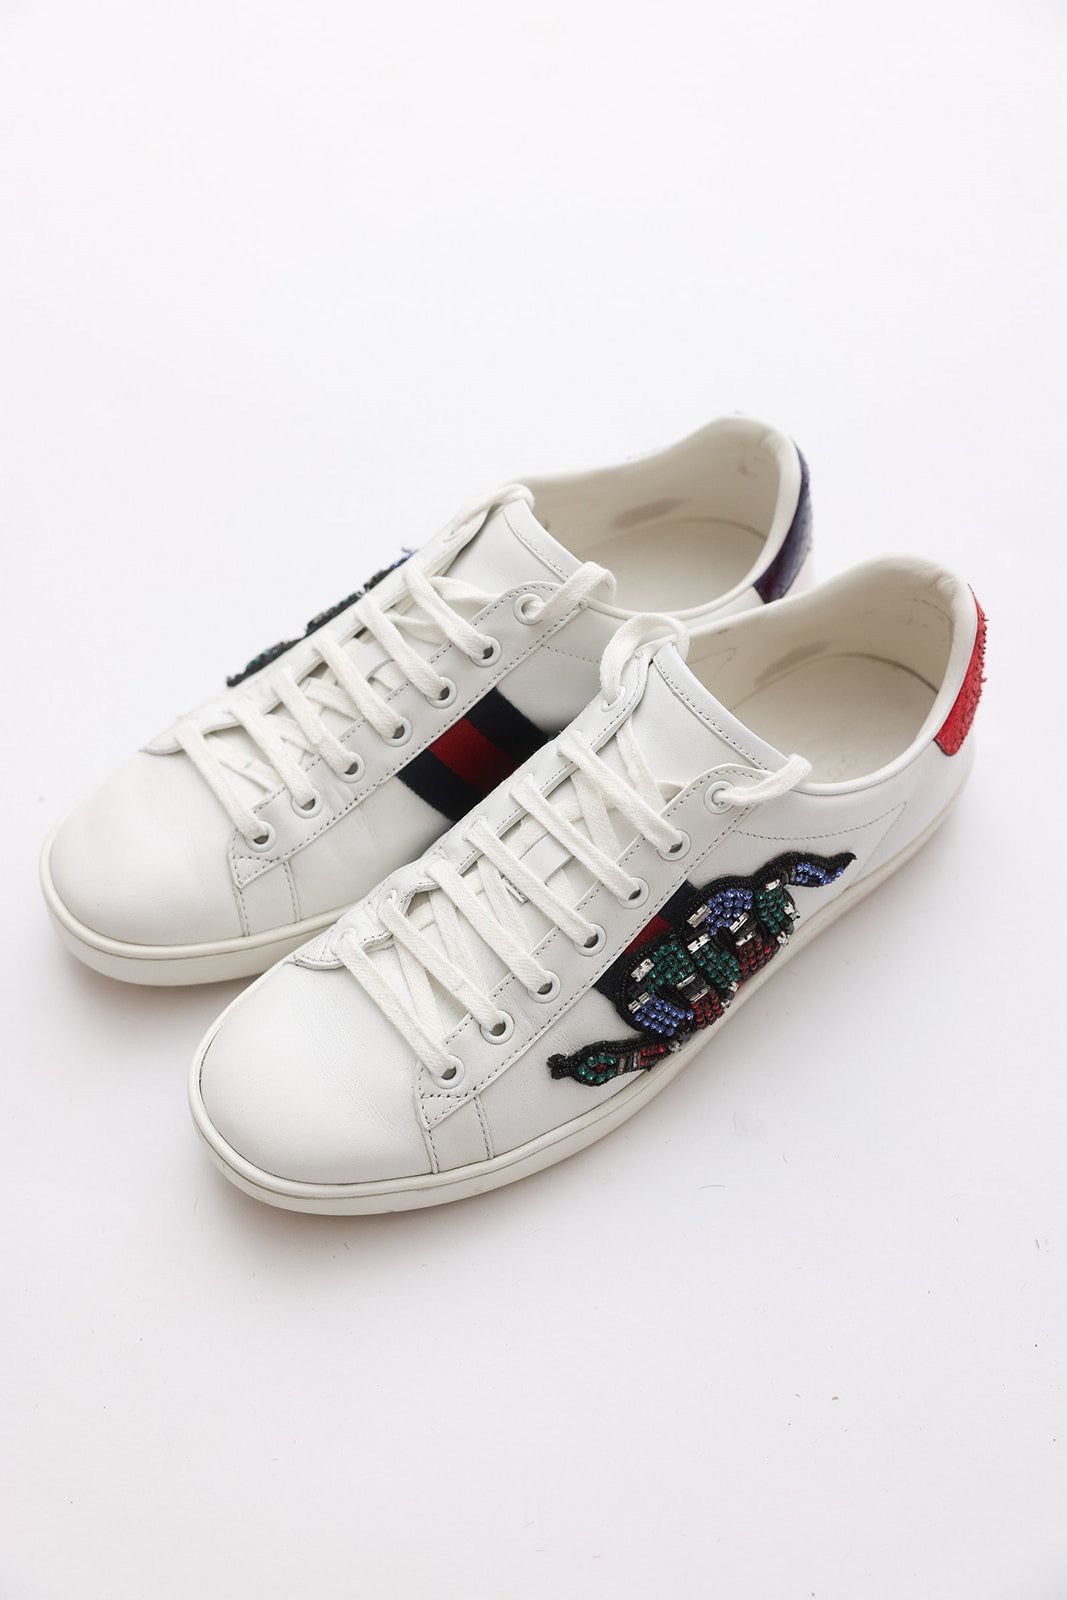 Gucci Embellished Runners